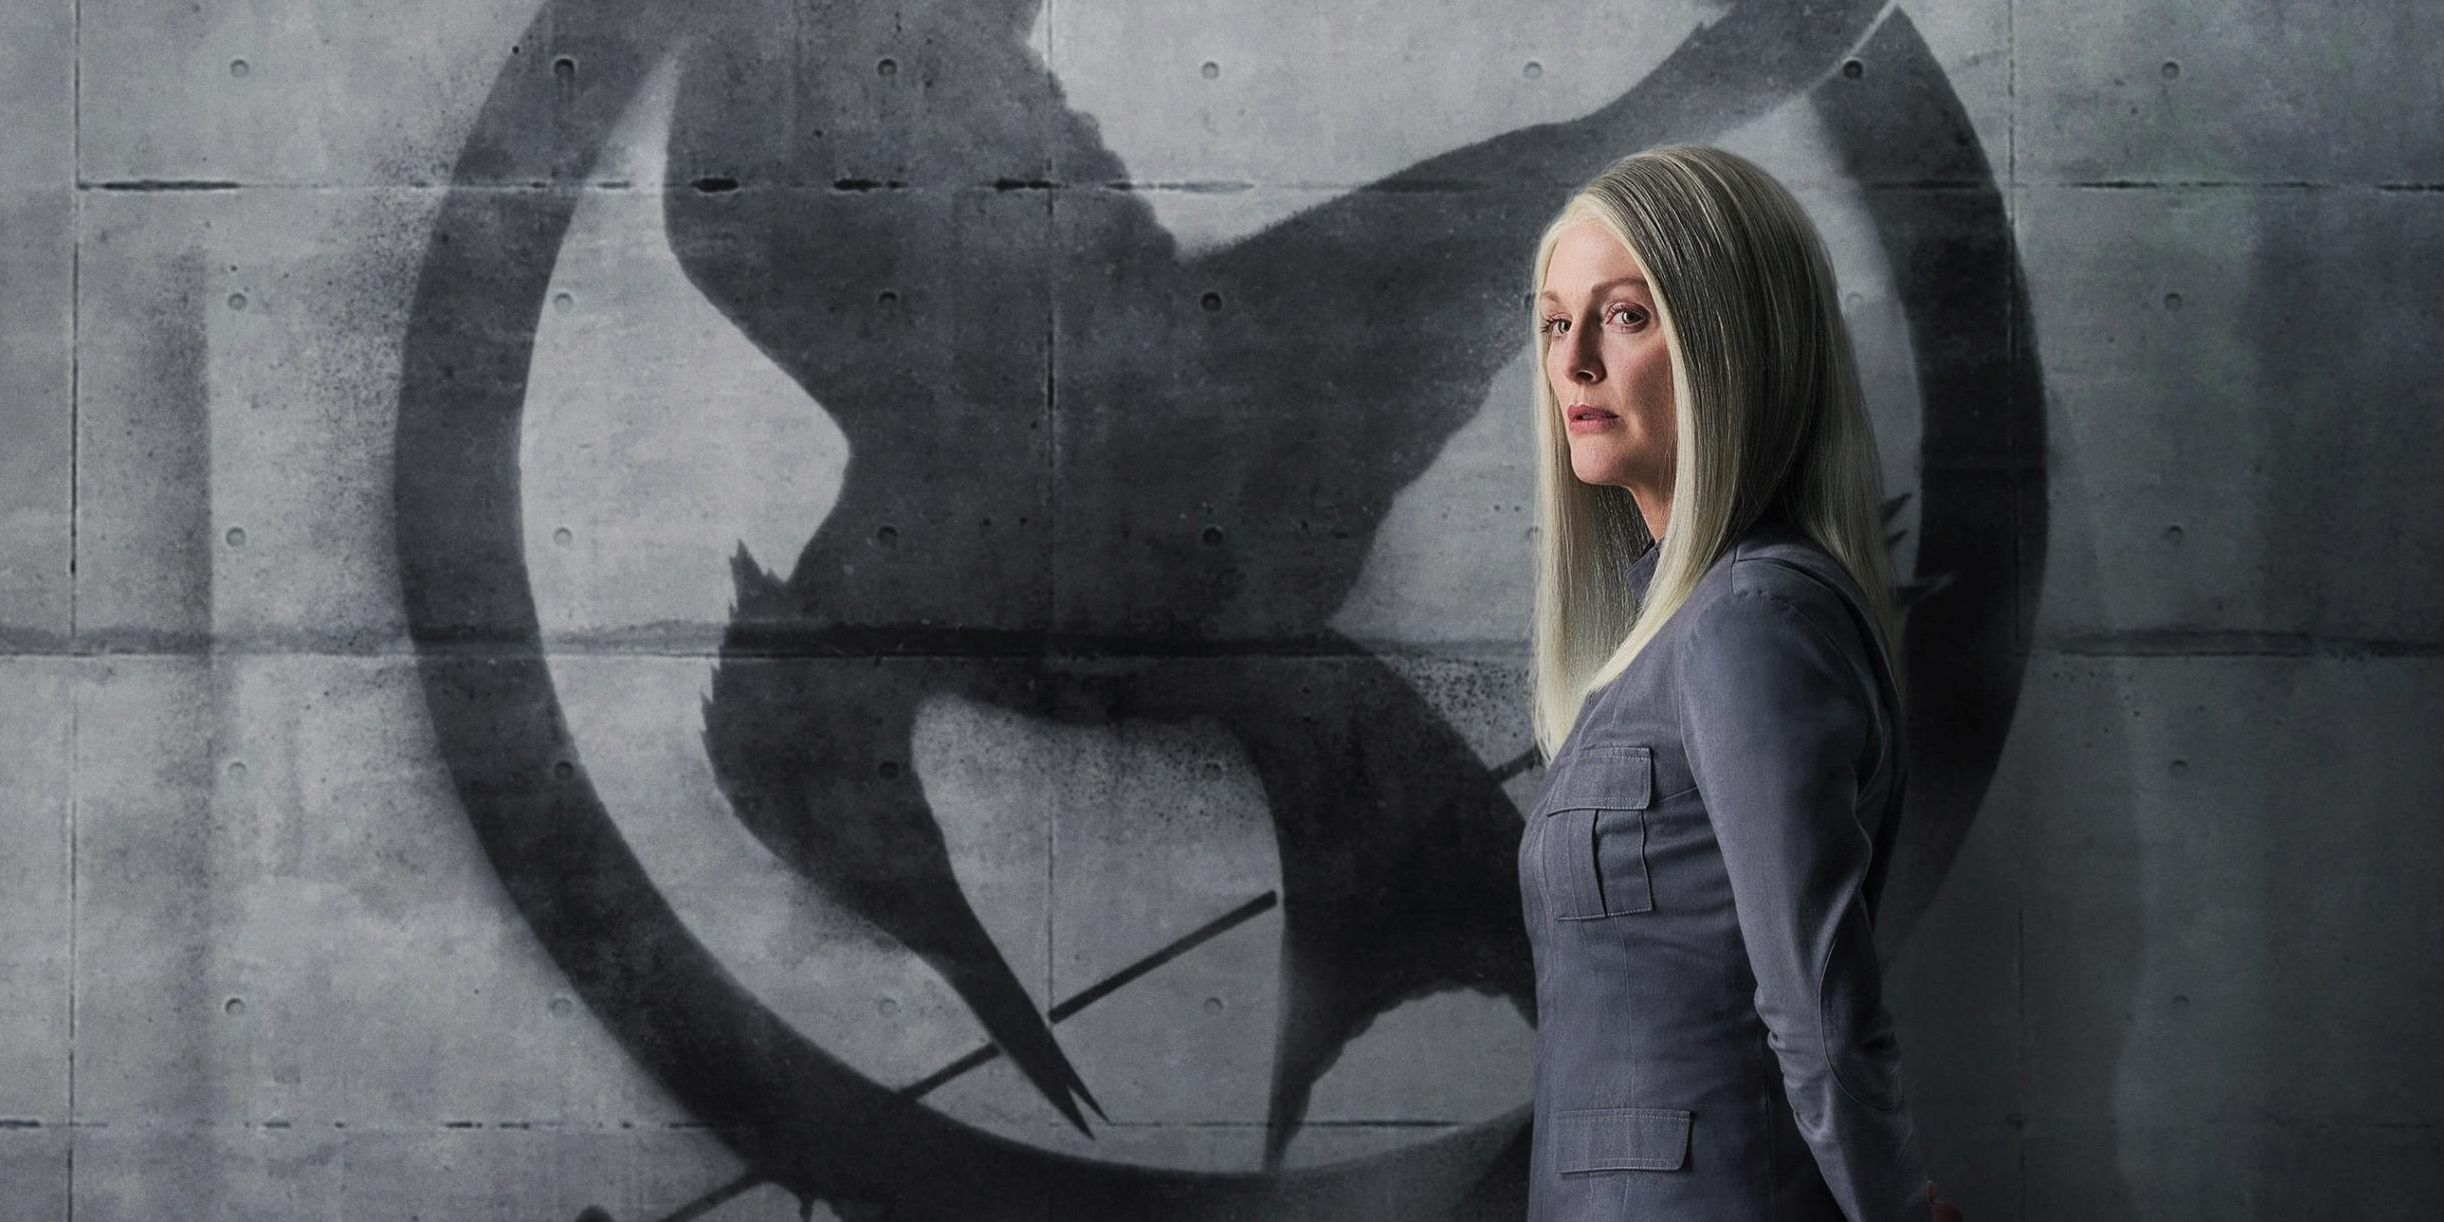 President Alma Coin in front of the Mockingjay symbol in a promotional image for the Hunger Games franchise